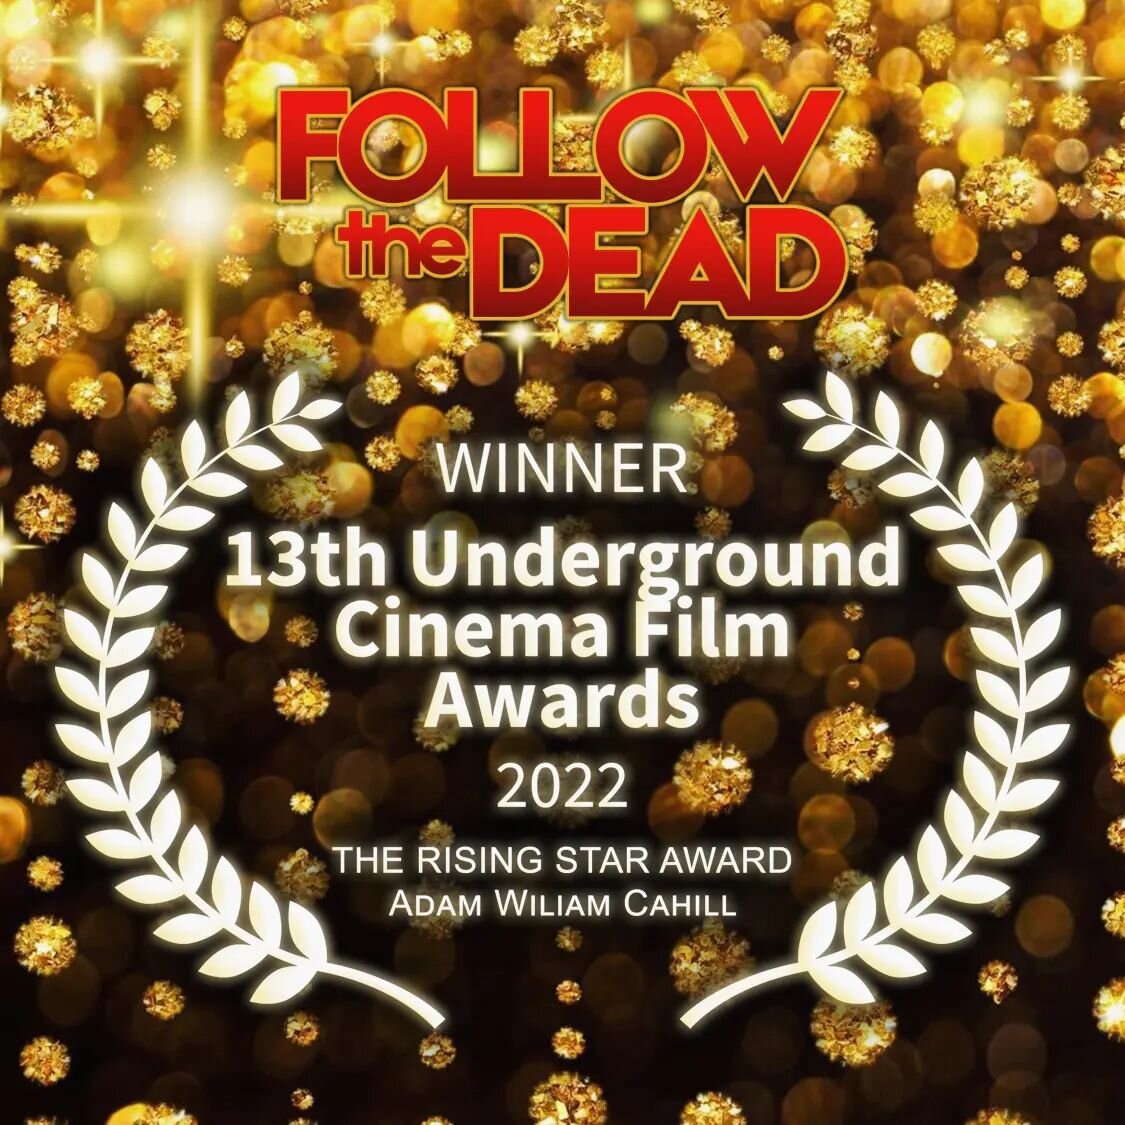 🌟 A COSMIC PREDICTION 🌟

Last night, the Underground Cinema held its 13th annual film awards ceremony, which was a very glamorous and exciting event where a few of the Follow the Dead team got to wine and dine with some of the finest indie filmmake